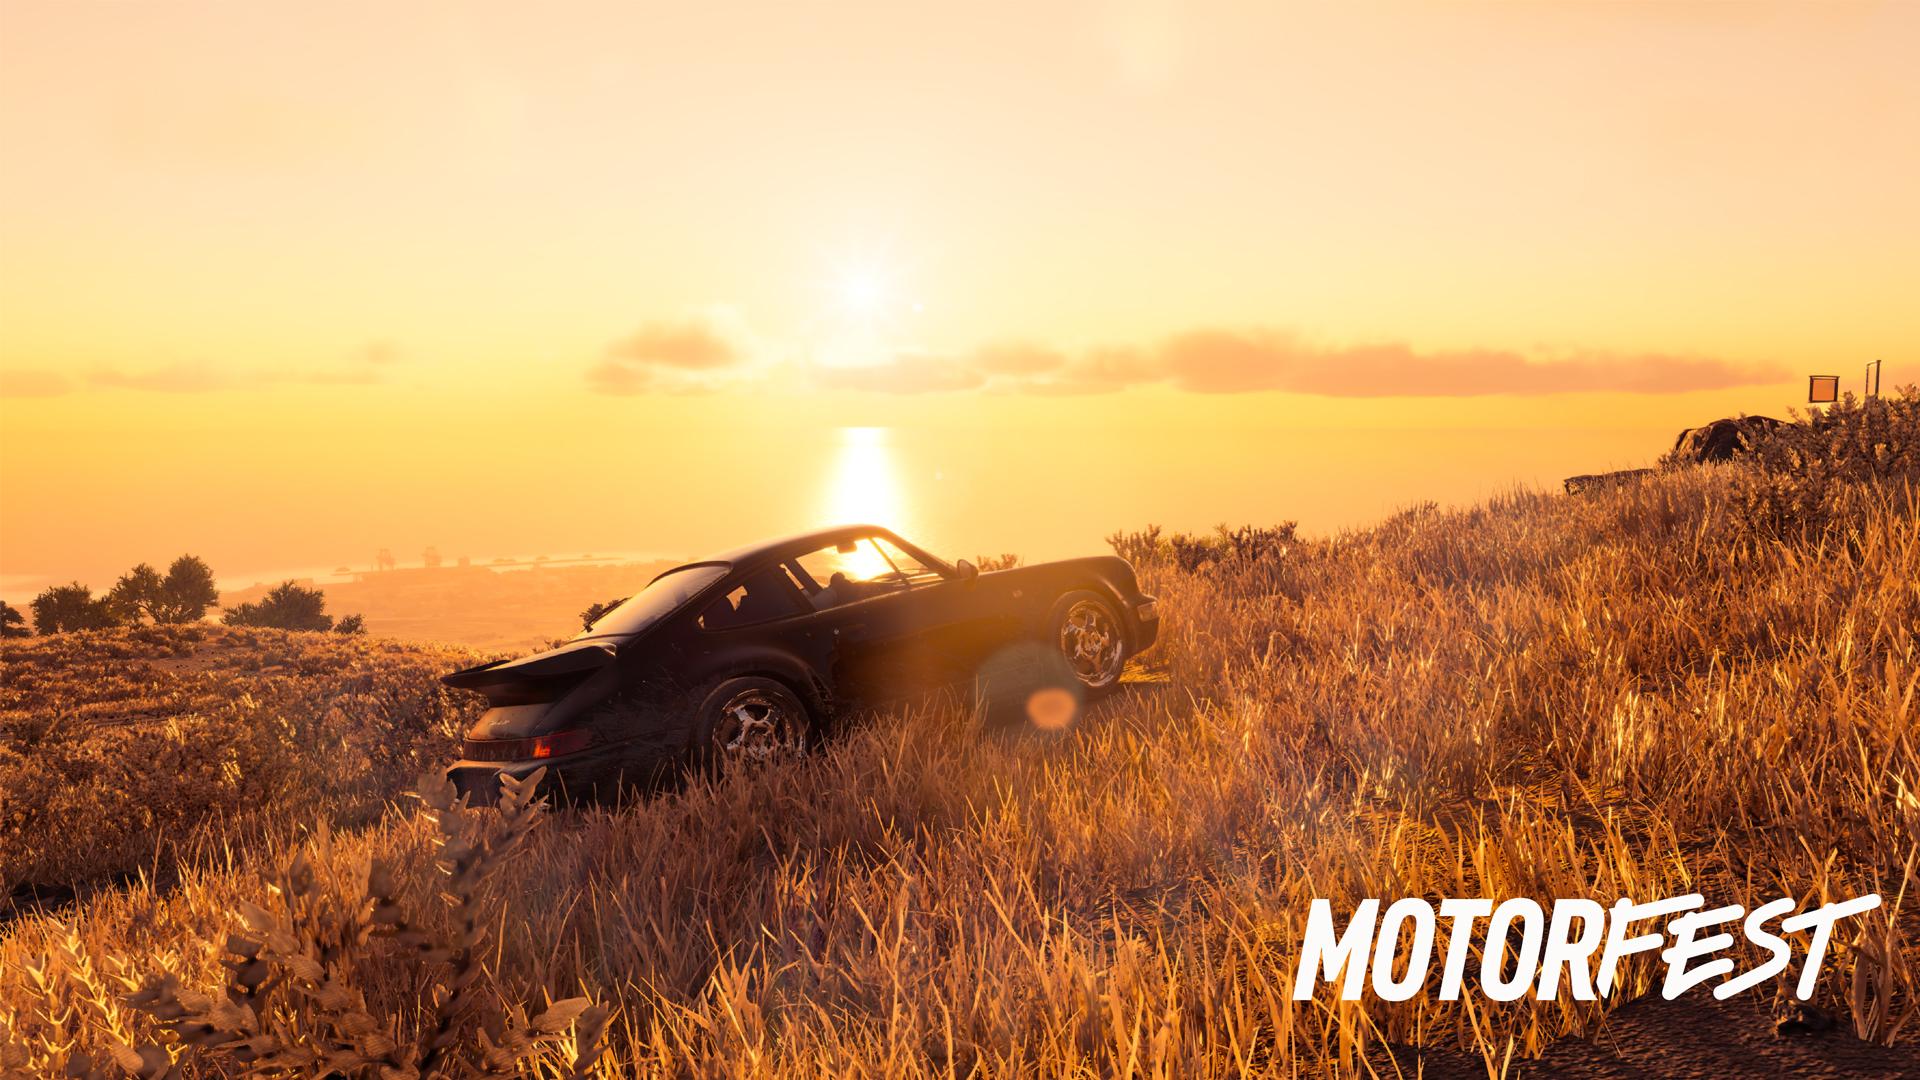 Play The Crew Motorfest 3 Days Early or Free For 5 Hours